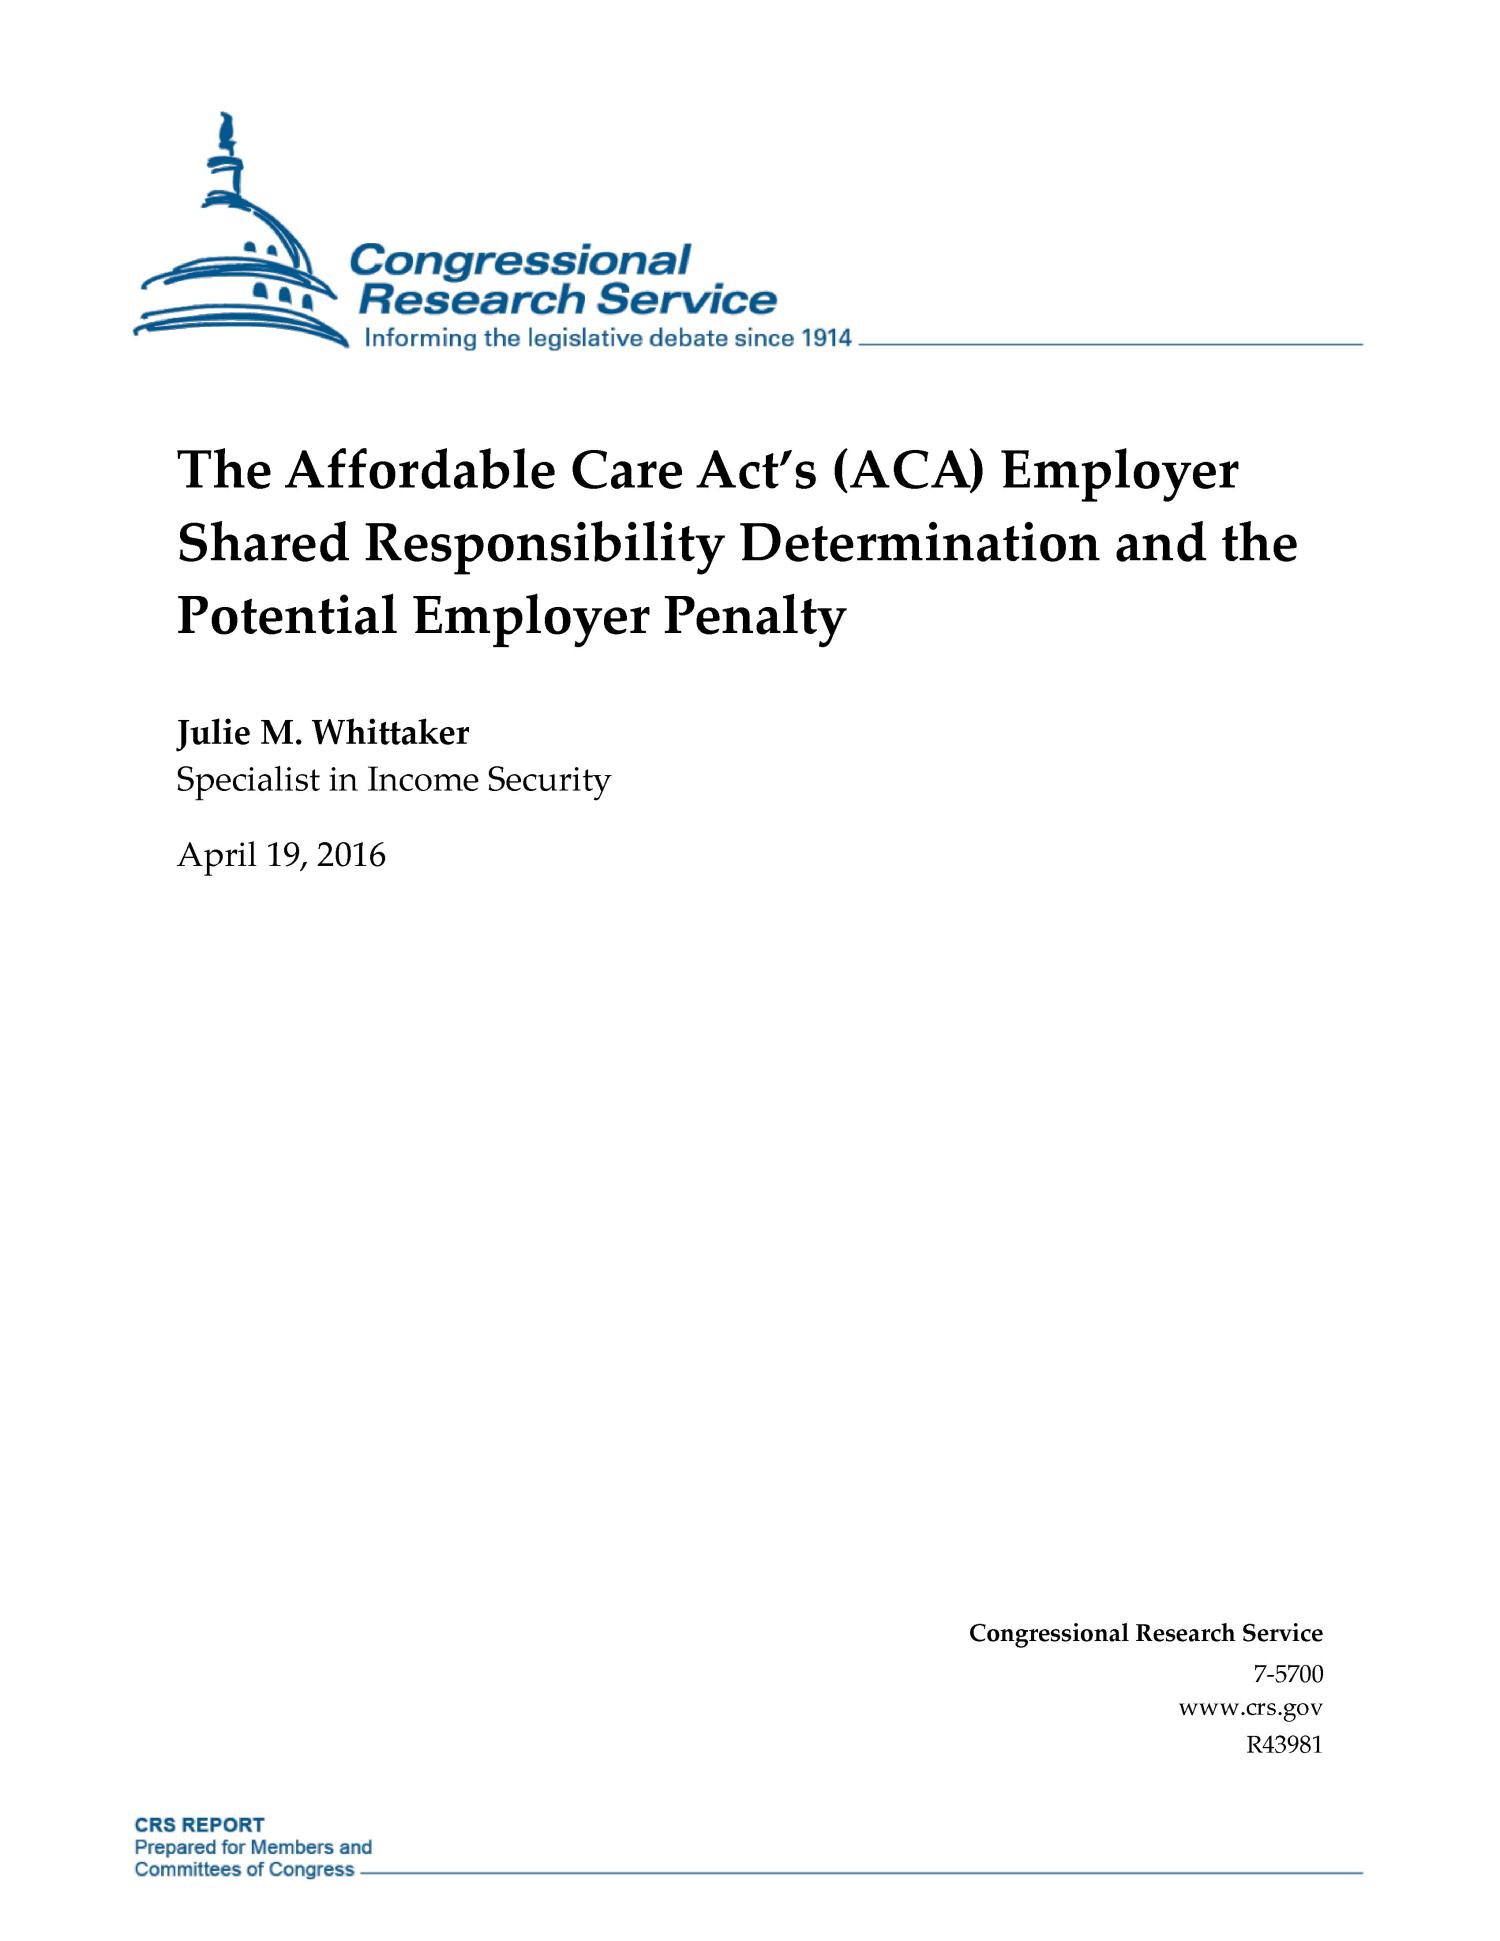 The Affordable Care Act's (ACA) Employer Shared Responsibility